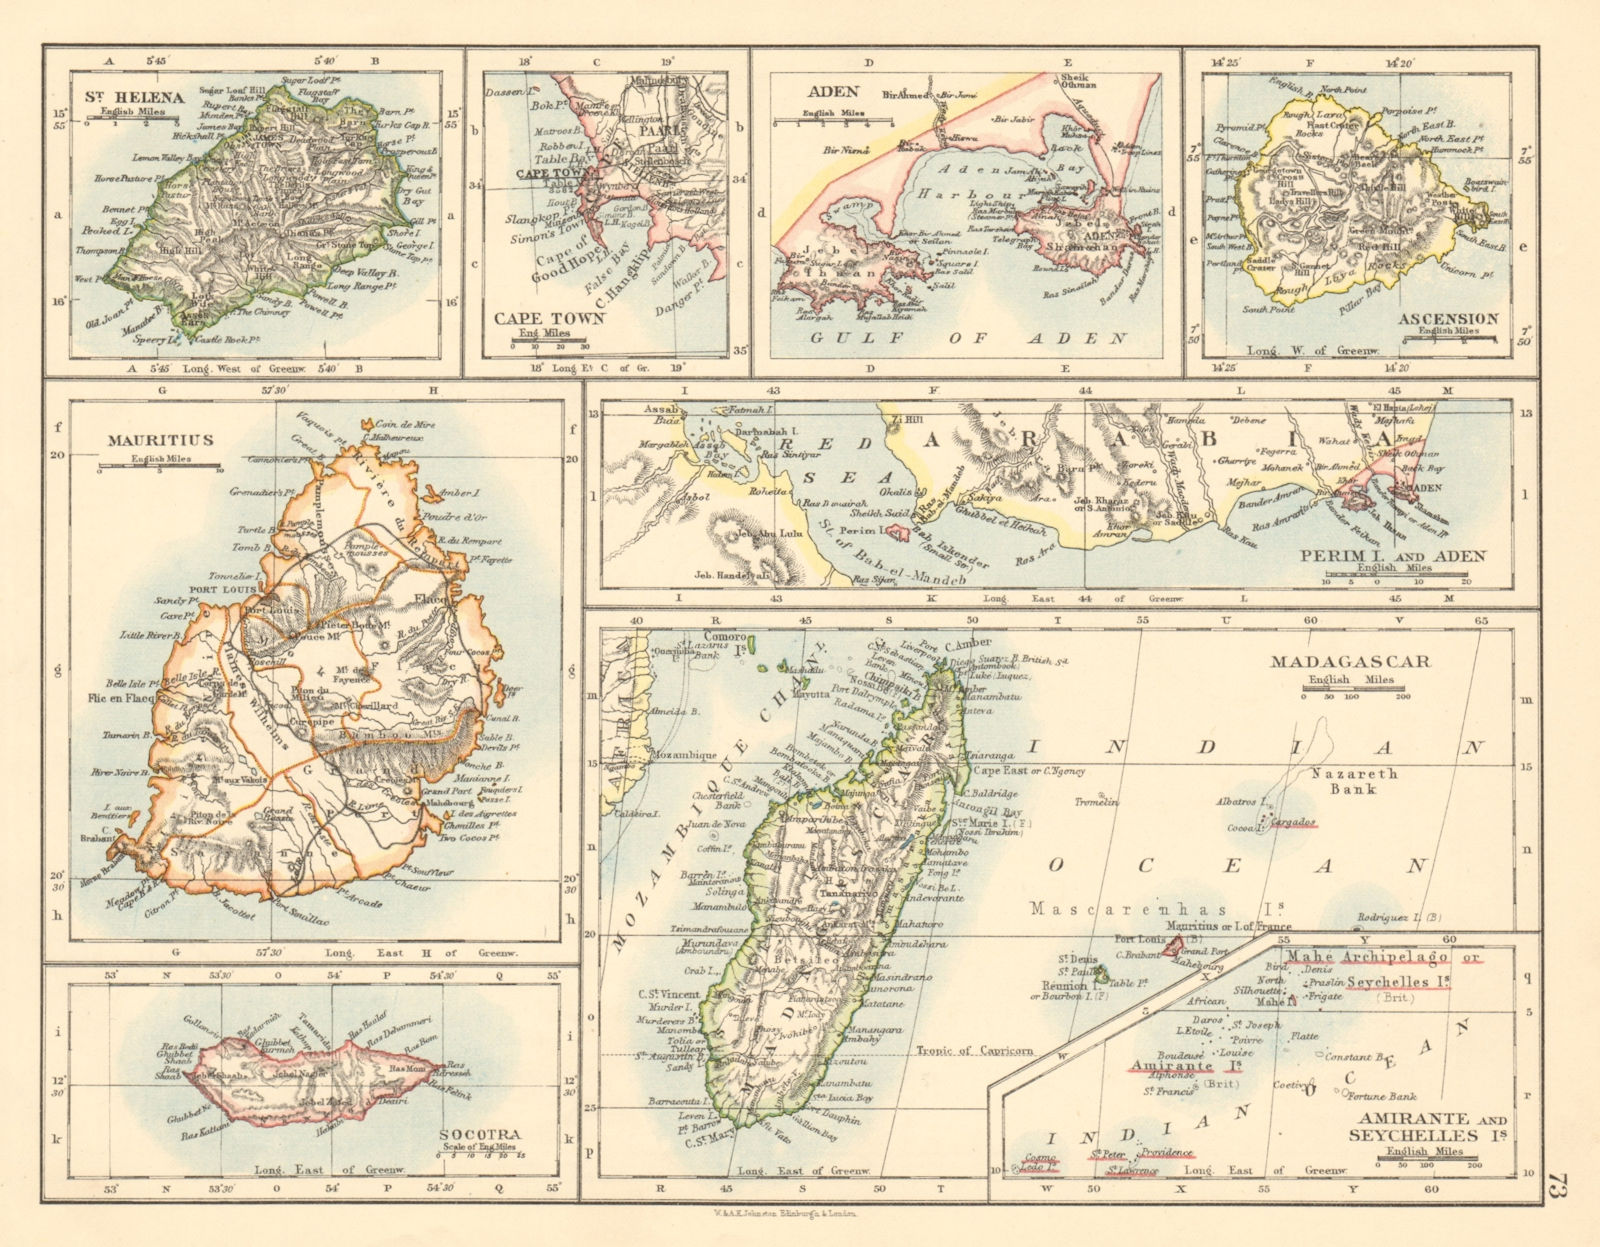 AFRICAN ISLANDS Mauritius Madagascar St Helena Ascension Socotra 1892 old map